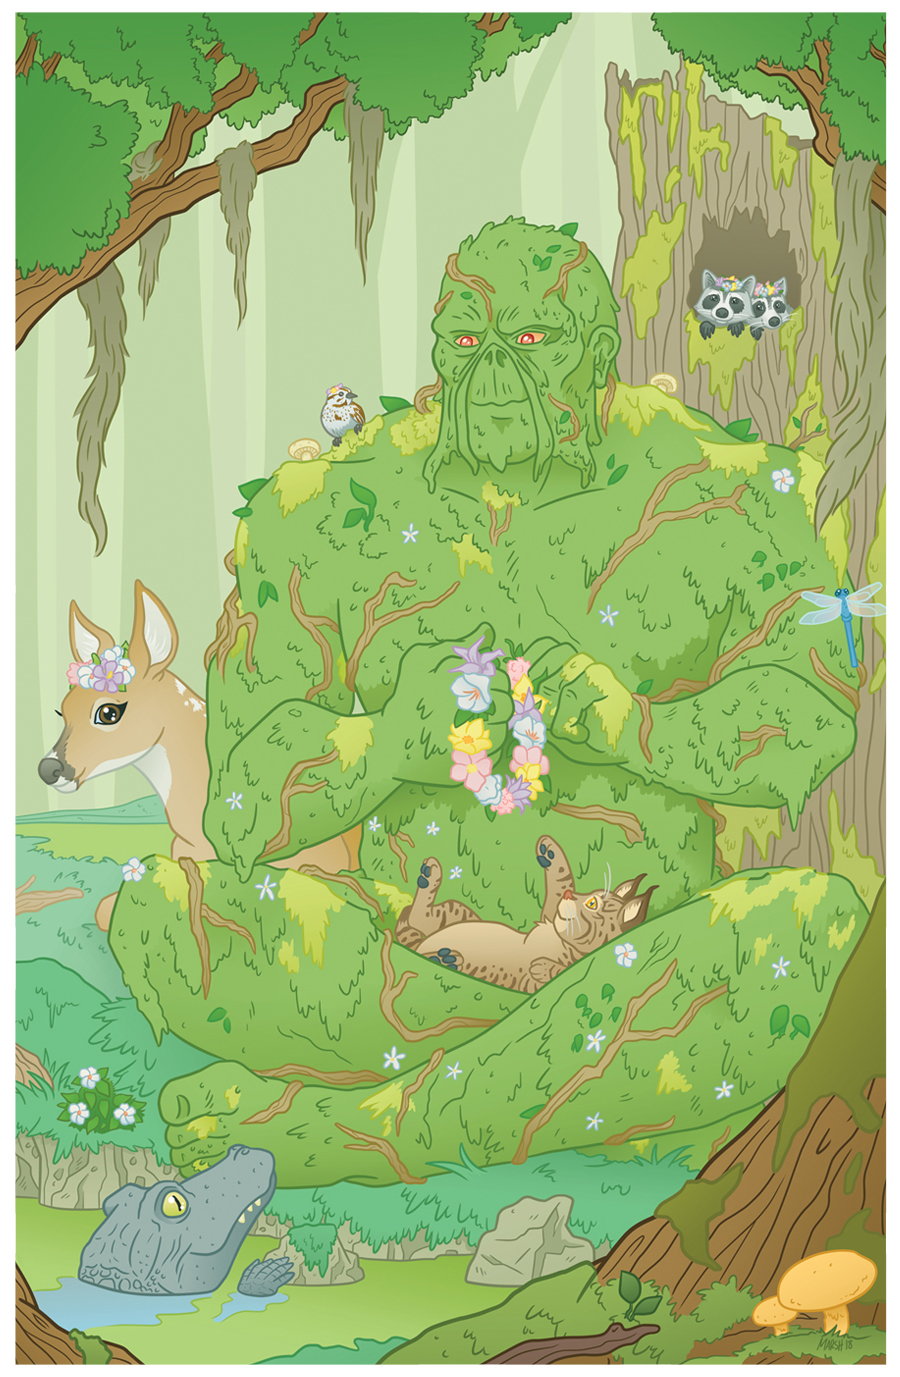  Swamp Thing hanging out with all his pals! 